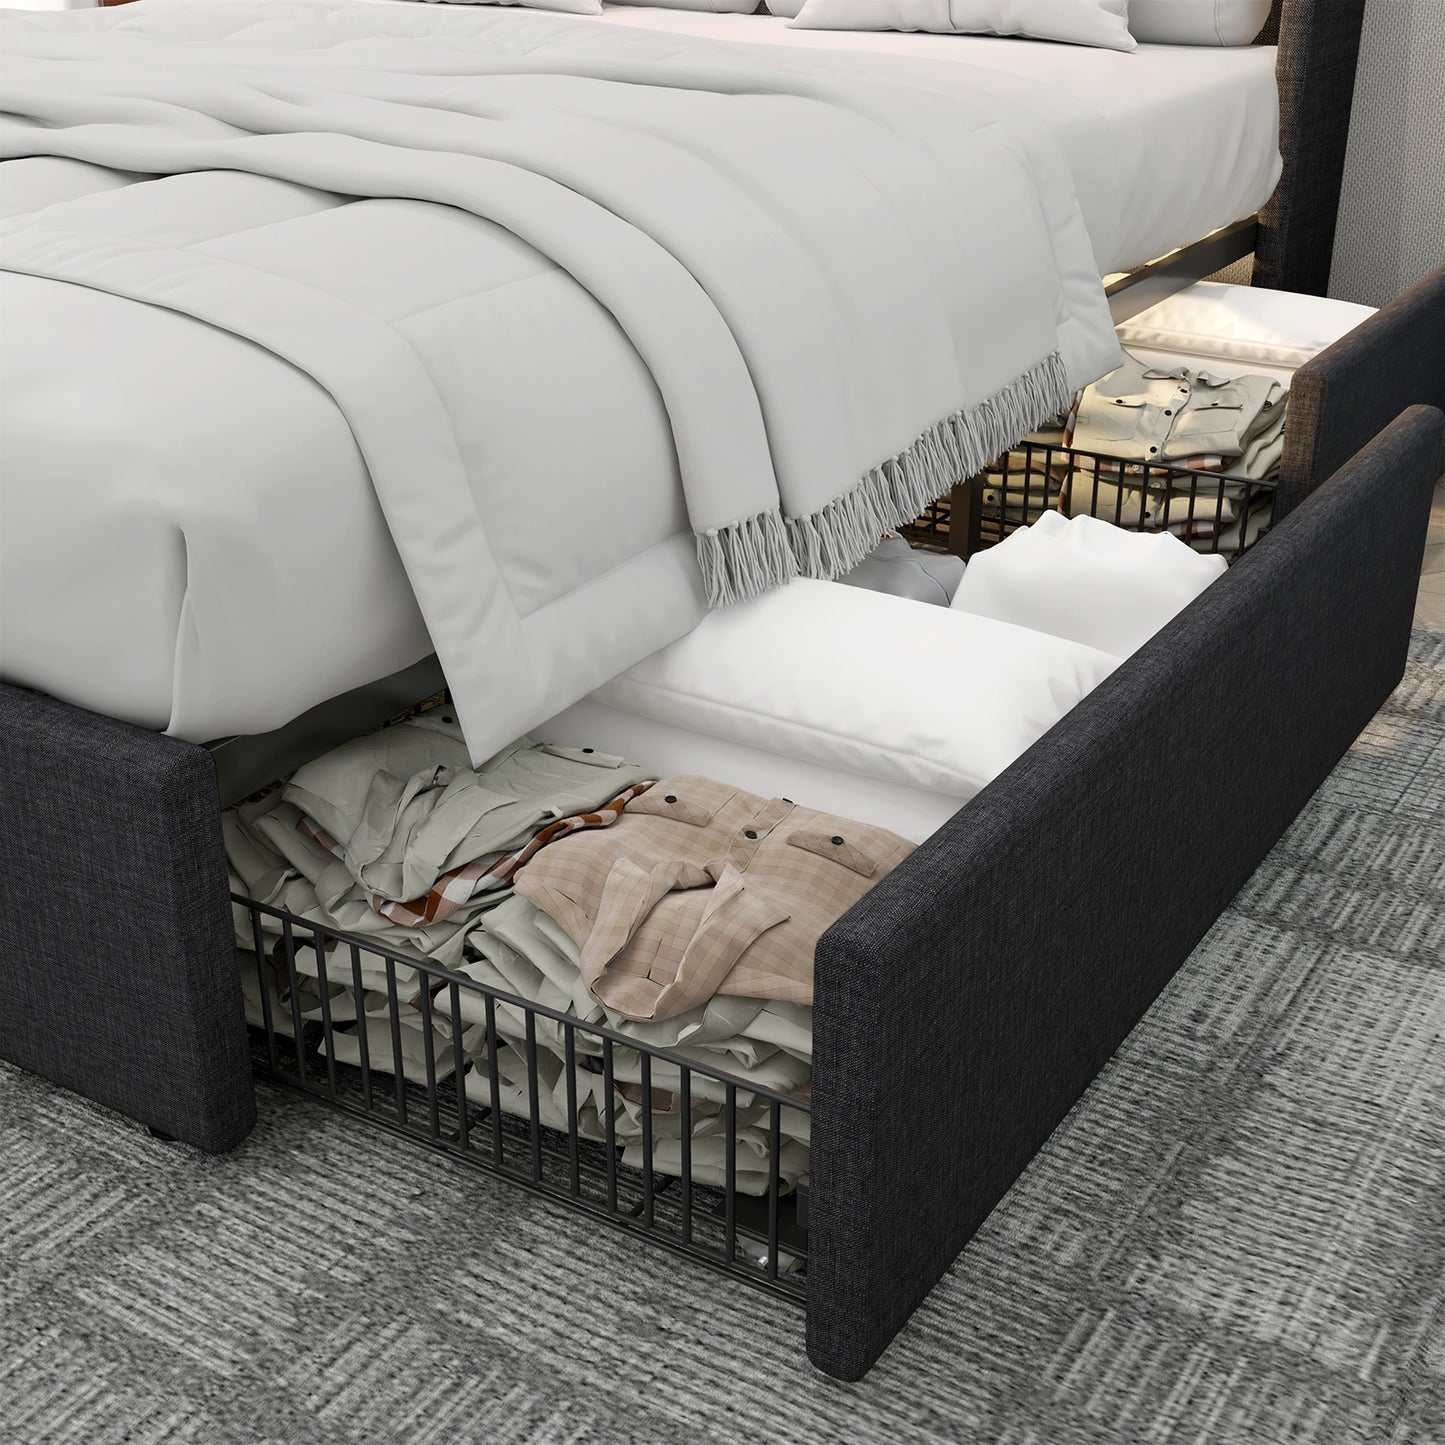 A close up view of two integrated storage drawers in the king sized albion bed frame